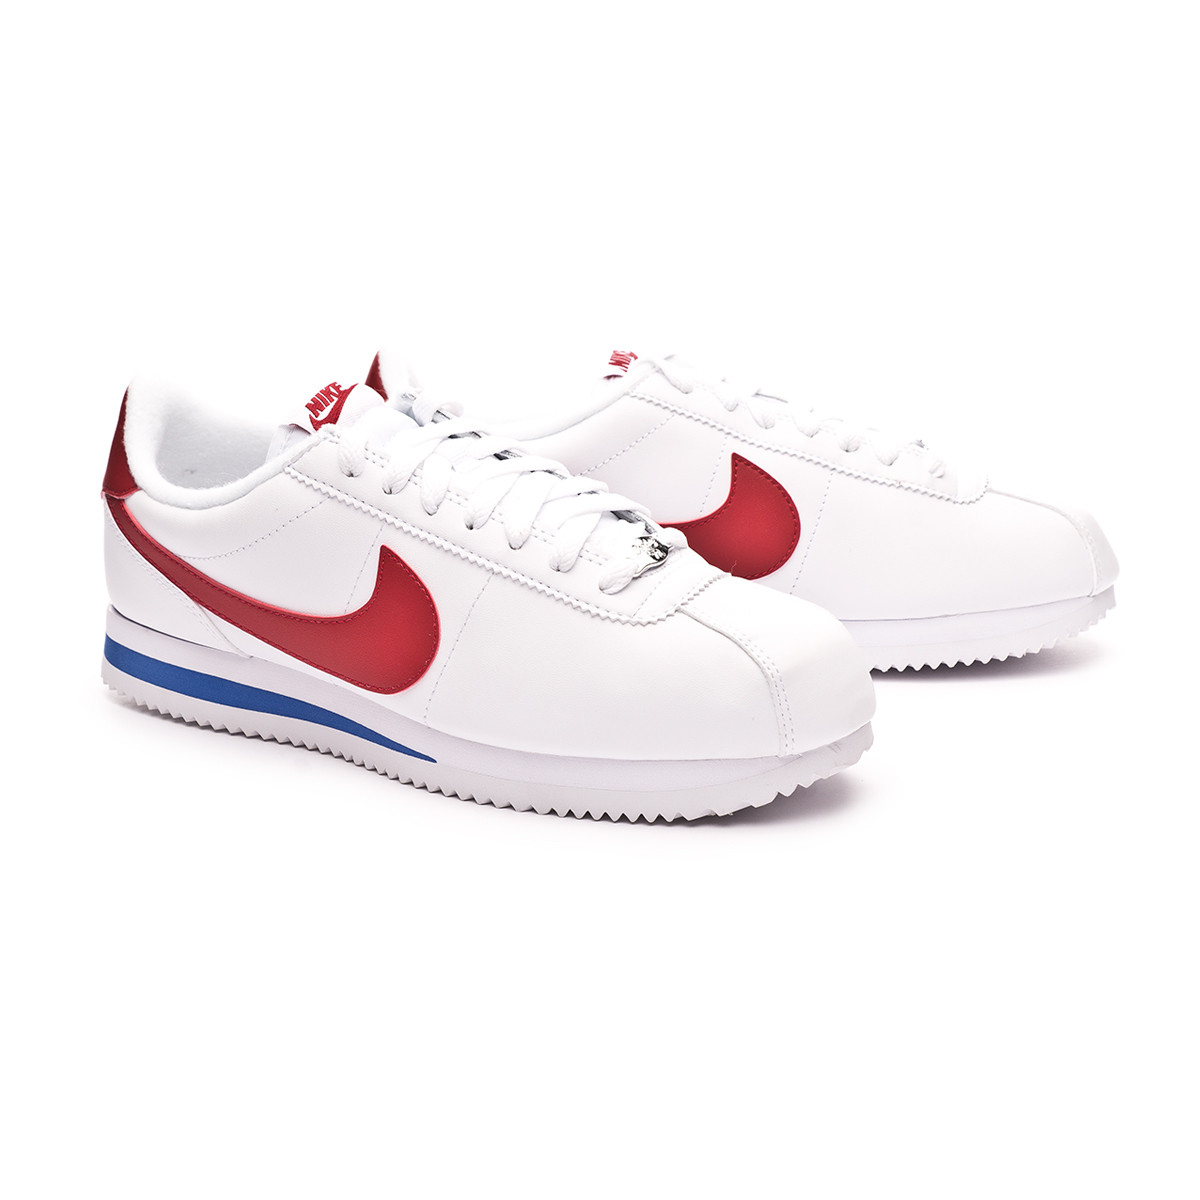 are nike cortez good for running